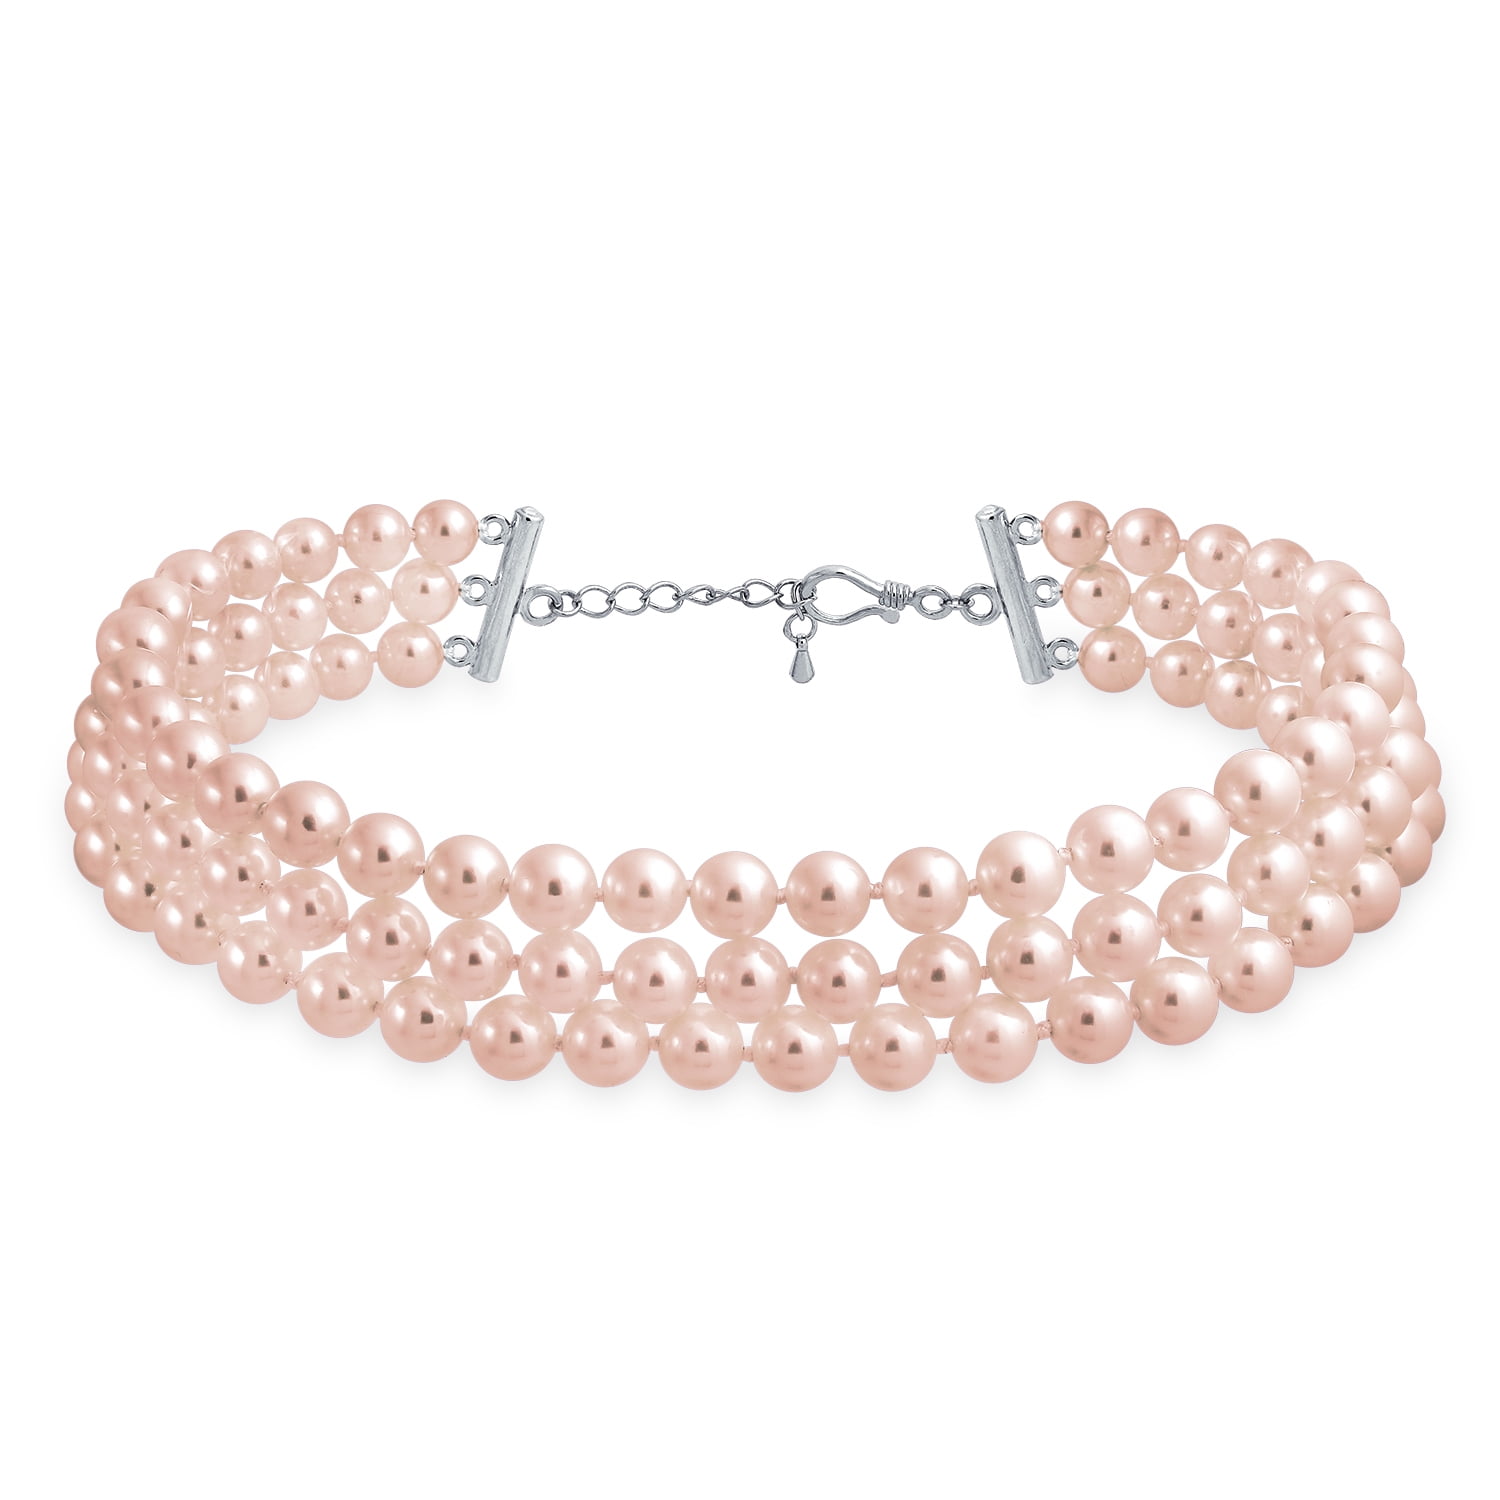 Hand Knotted 3 Row Wide Pink Imitation Pearl Strand Choker Necklace